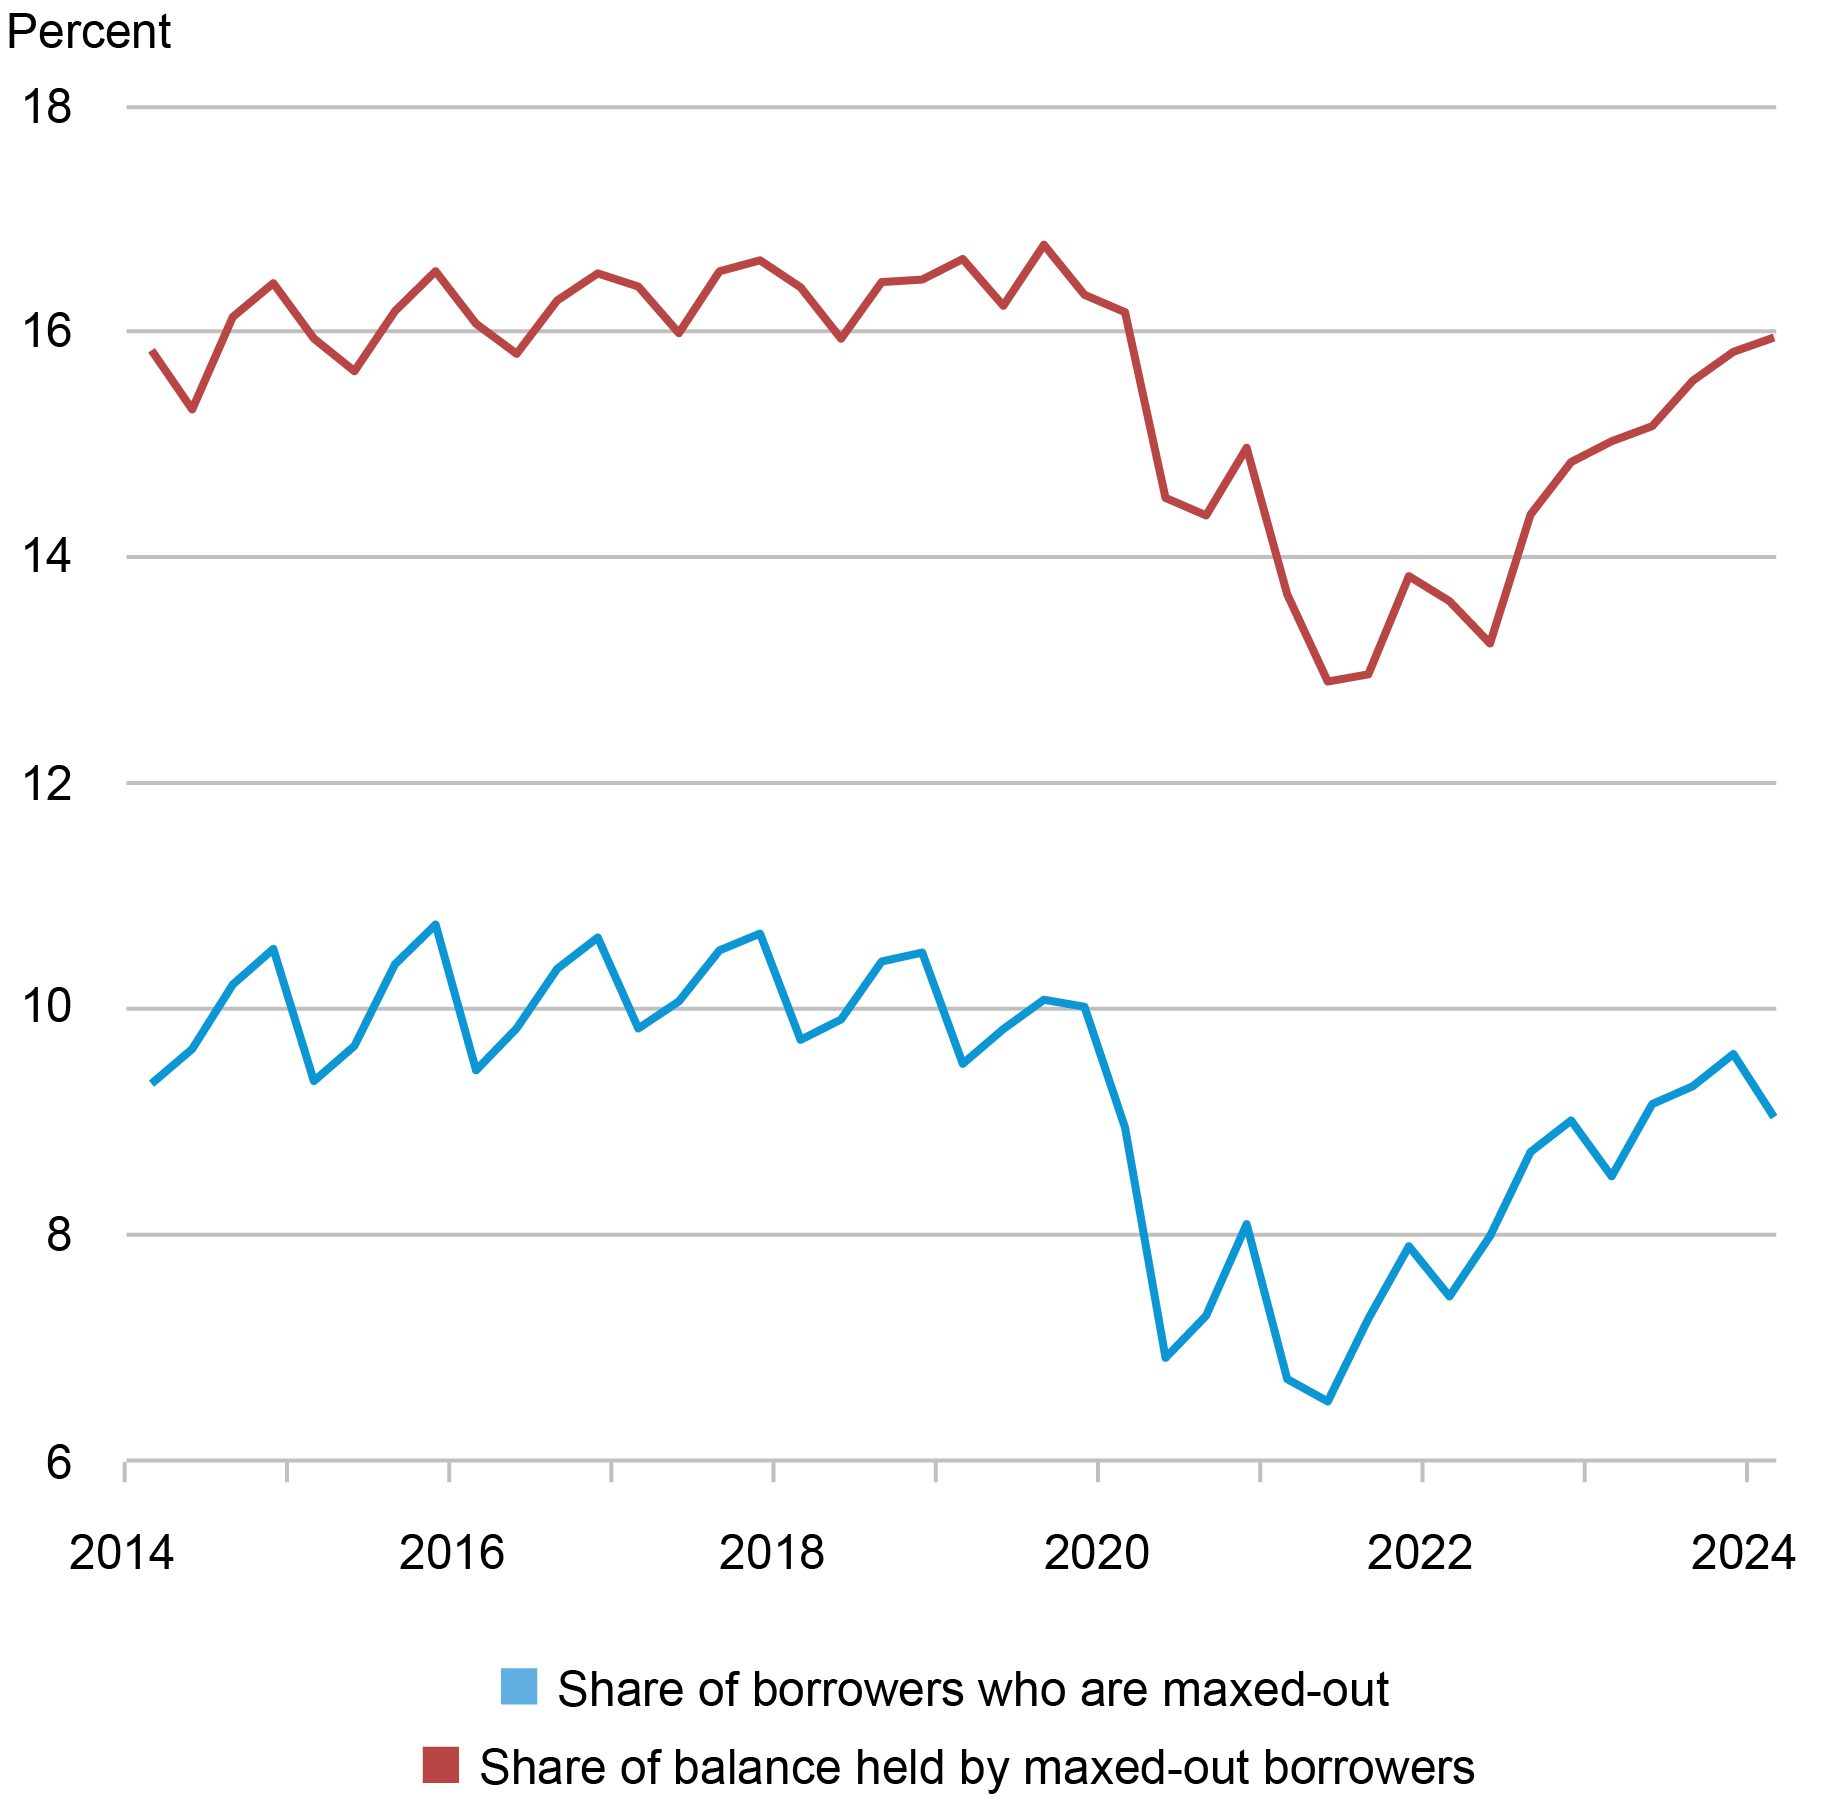 Line chart tracking the share of borrowers who are maxed out (light blue) and the share of balance held by maxed-out borrowers (red) by percentage from 2014 through 2024.